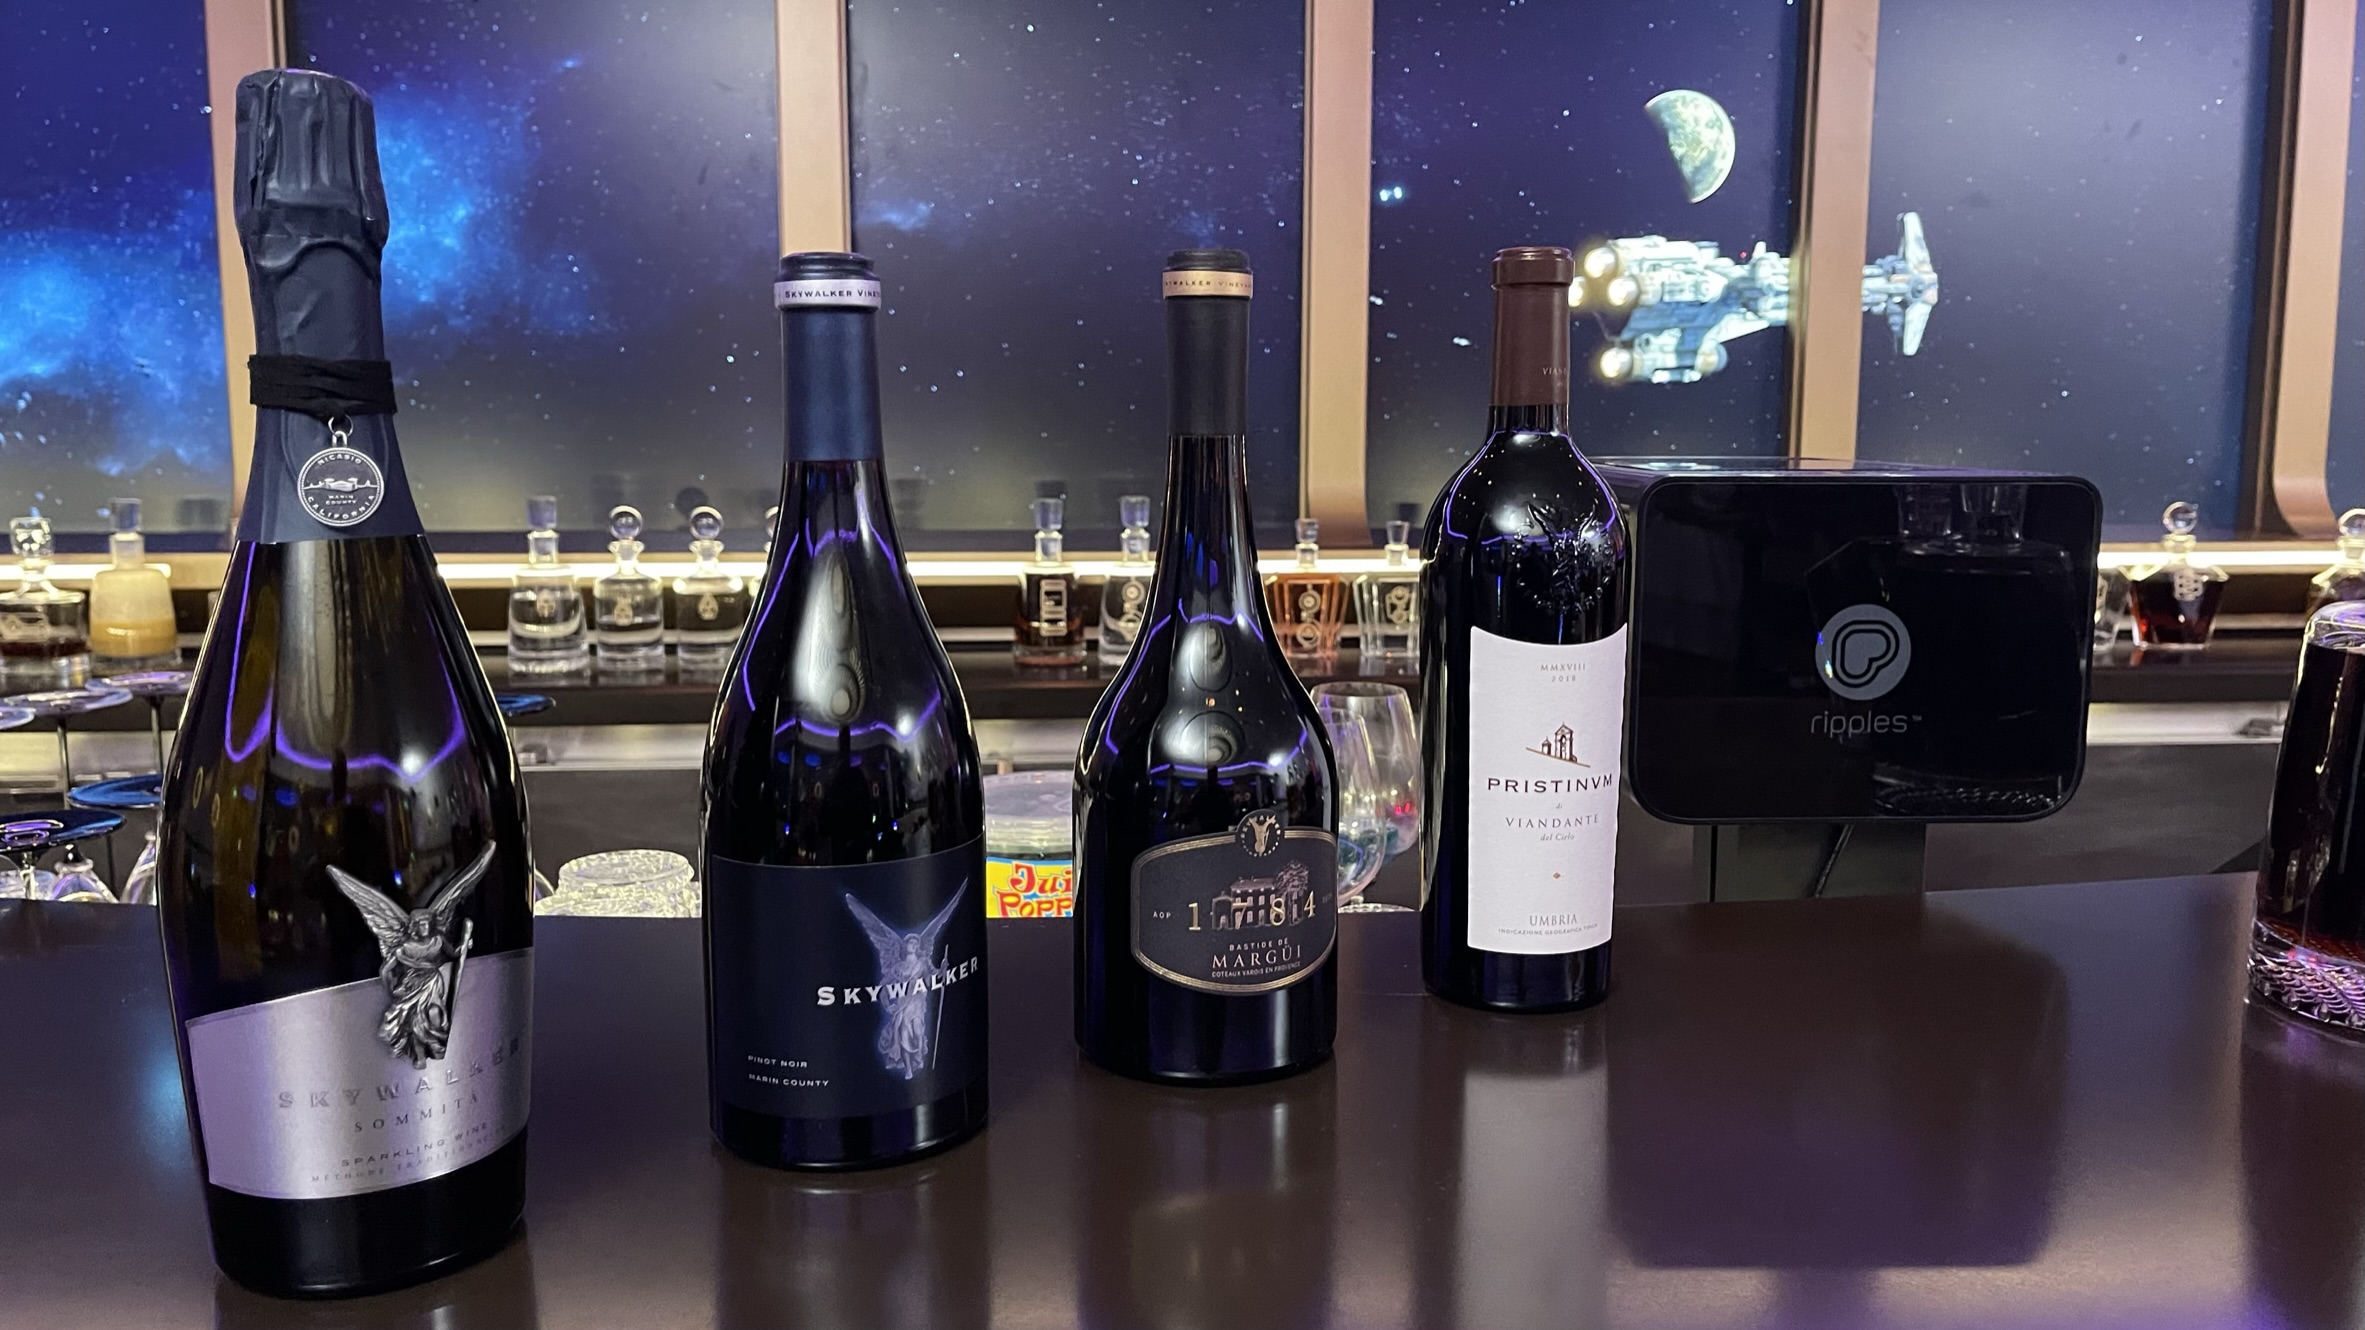 The Disney Wish | Star Wars Hyperspace Lounge | Colin makes us a Tatooine | Selection of Skywalker Ranch Wines